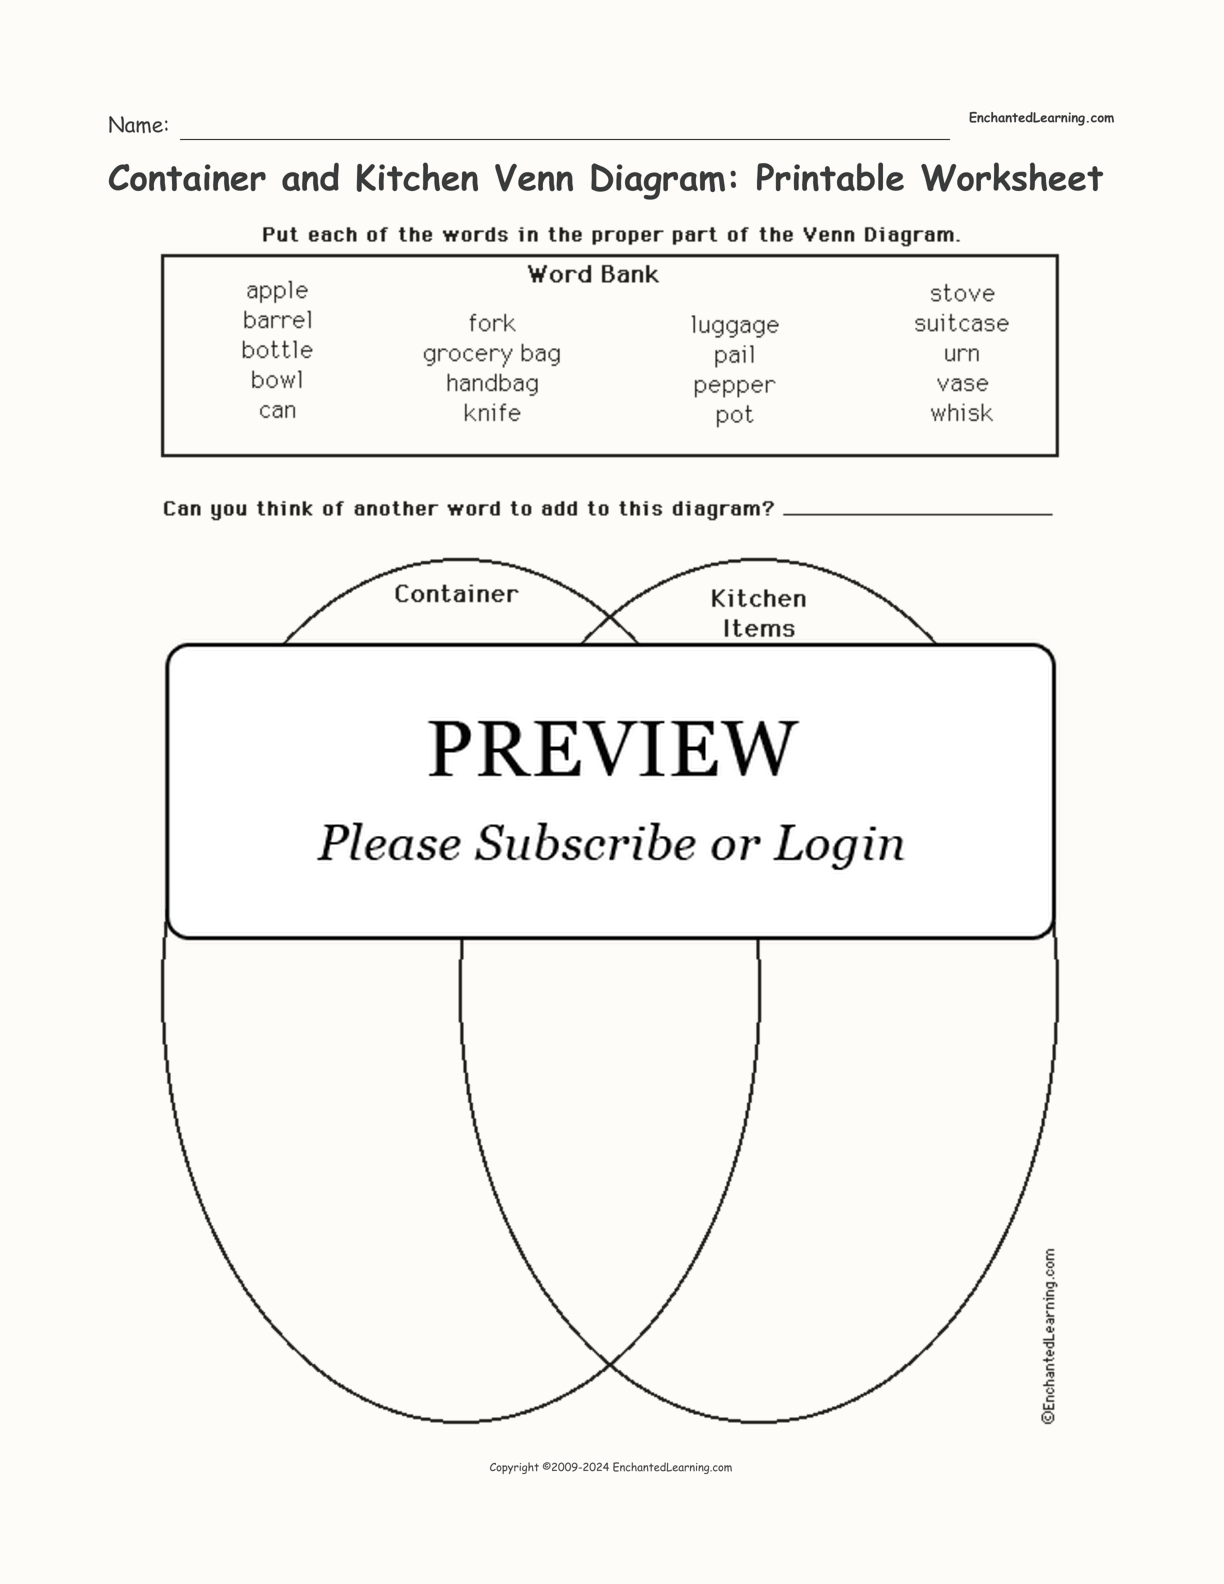 Container and Kitchen Venn Diagram: Printable Worksheet interactive worksheet page 1